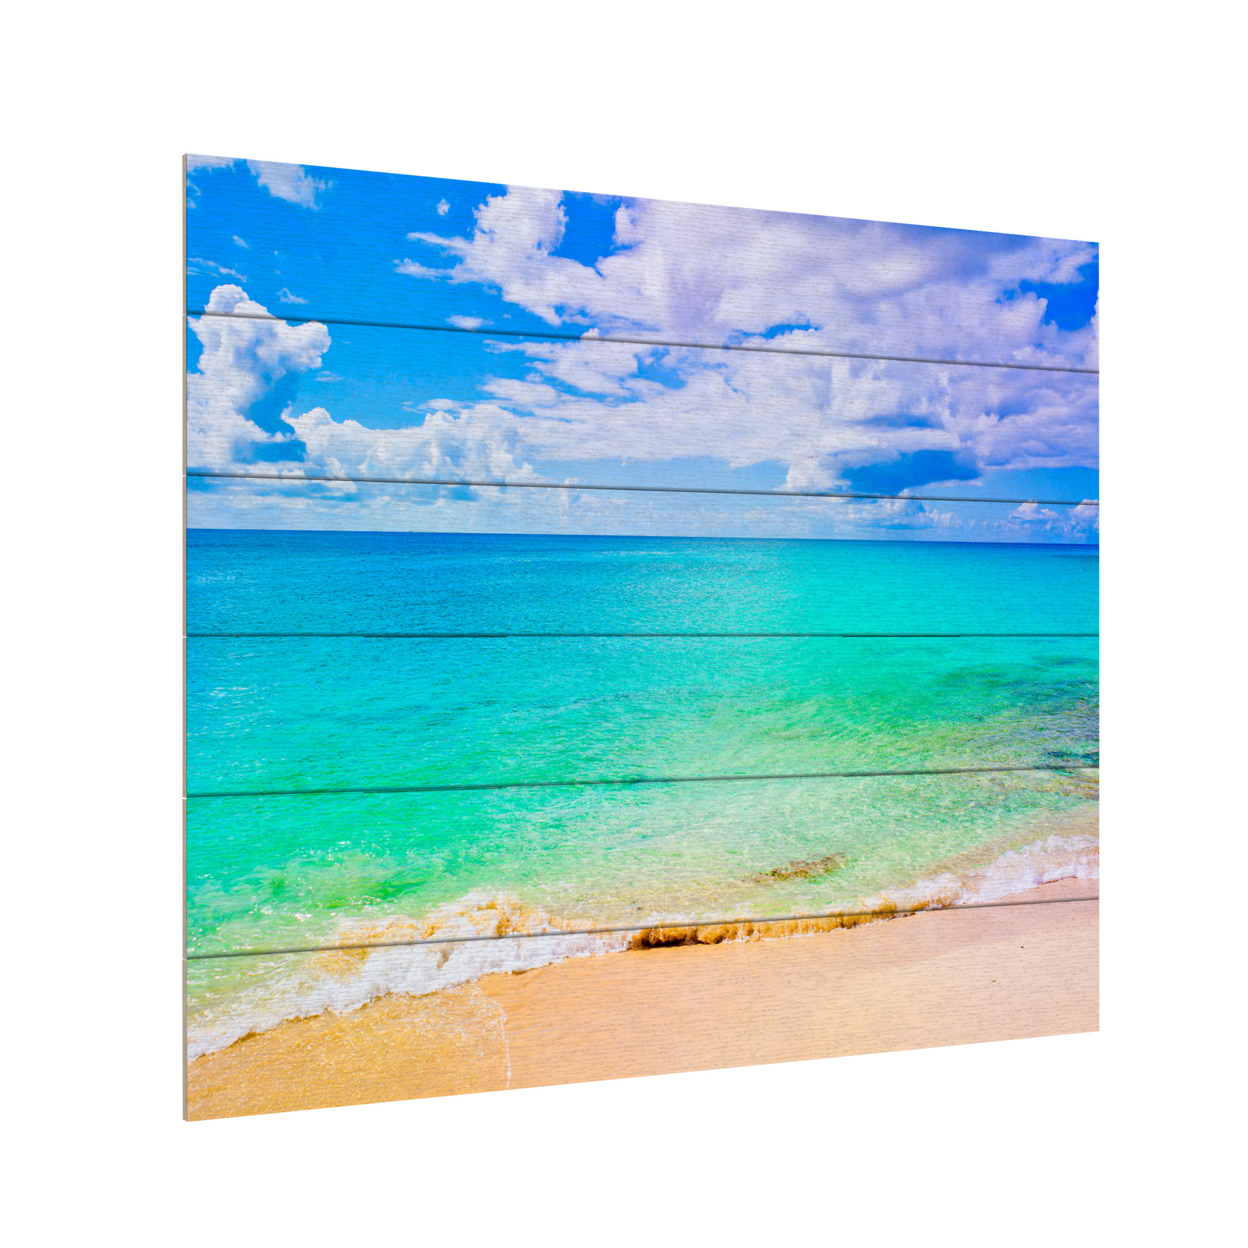 Wooden Slat Art 18 X 22 Inches Titled Maho Beach Ready To Hang Home Decor Picture